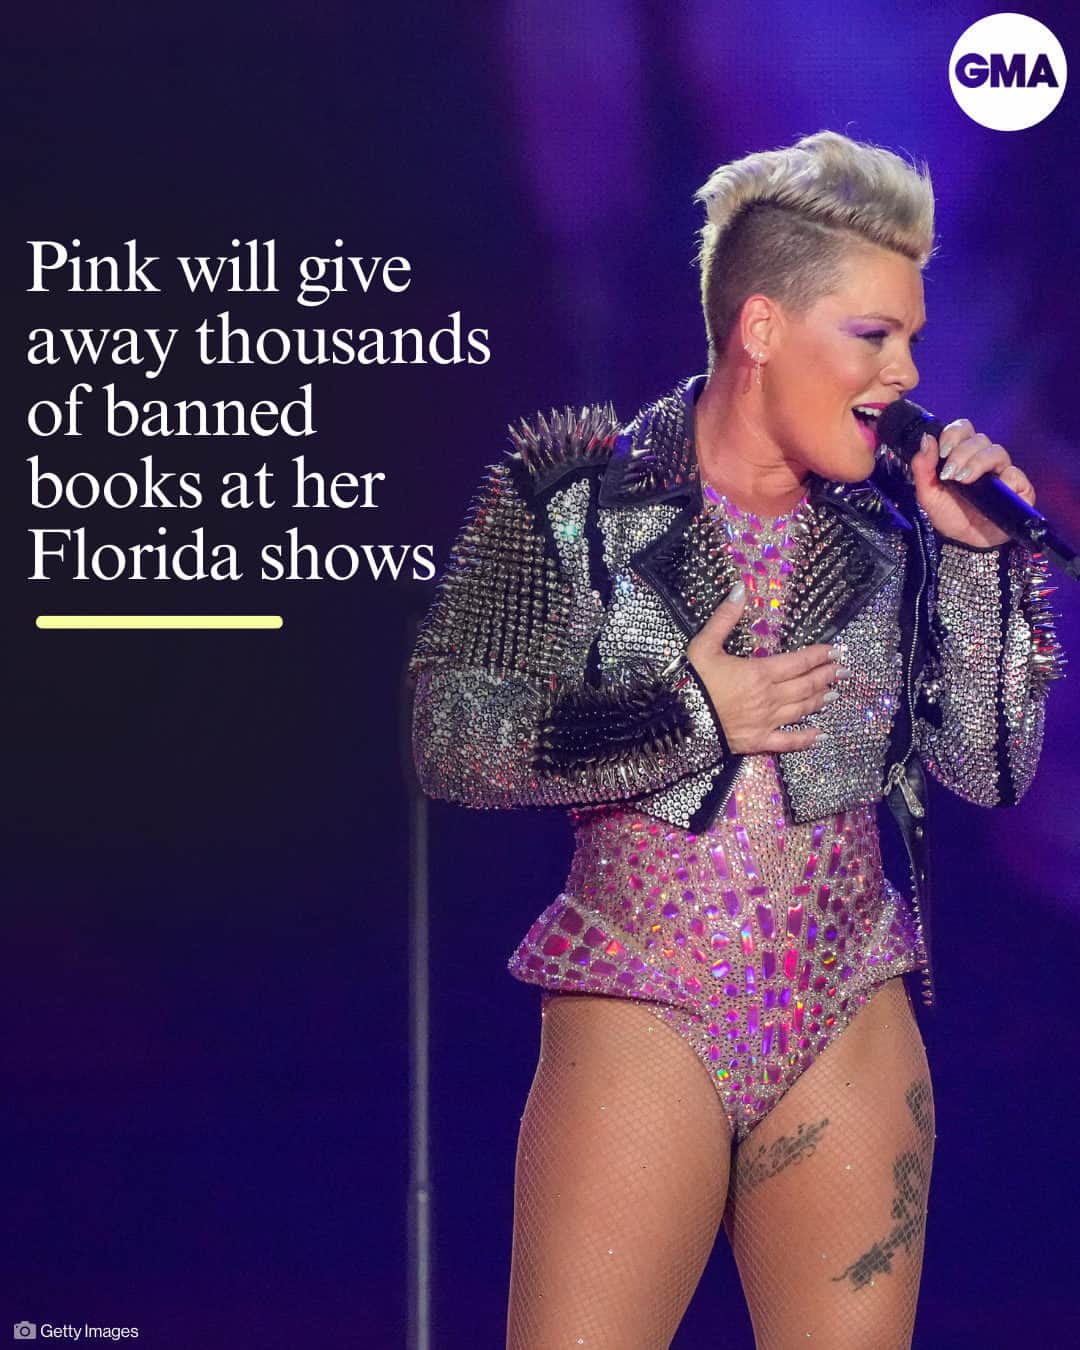 Good Morning Americaのインスタグラム：「Pink has teamed up with the charity PEN America to take a stand against book bans in Florida, announcing on Instagram over the weekend that she plans to give away 1,000 banned books at each of her shows in the state.  "Did you know there have been nearly 6,000 book bans since the fall of 2021? And nearly 40% of the books bans in the last school year occurred in Florida?" she wrote in the caption of a post promoting the book giveaway. "As a mom of two young readers, I can't imagine letting someone else decide what MY CHILDREN can and cannot read!"  In a statement, Pink added, "Books have held a special joy for me from the time I was a child, and that's why I am unwilling to stand by and watch while books are banned by schools. It's especially hateful to see authorities take aim at books about race and racism and against LGBTQ authors and those of color."  Find more at our link in bio.」